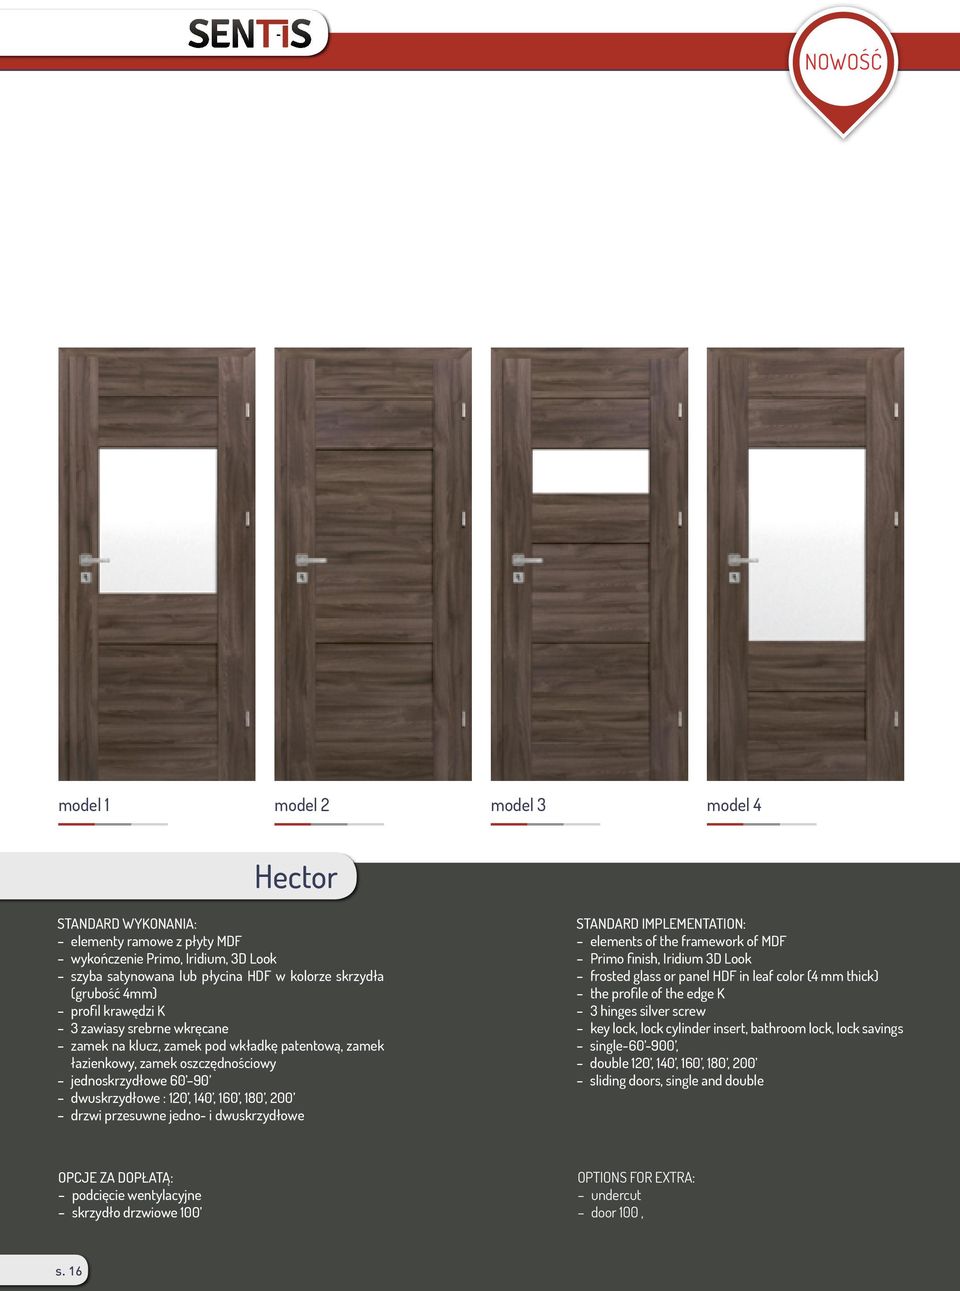 drzwi przesuwne jedno- i dwuskrzydłowe STANDARD IMPLEMENTATION: elements of the framework of MDF Primo finish, Iridium 3D Look frosted glass or panel HDF in leaf color (4 mm thick) the profile of the